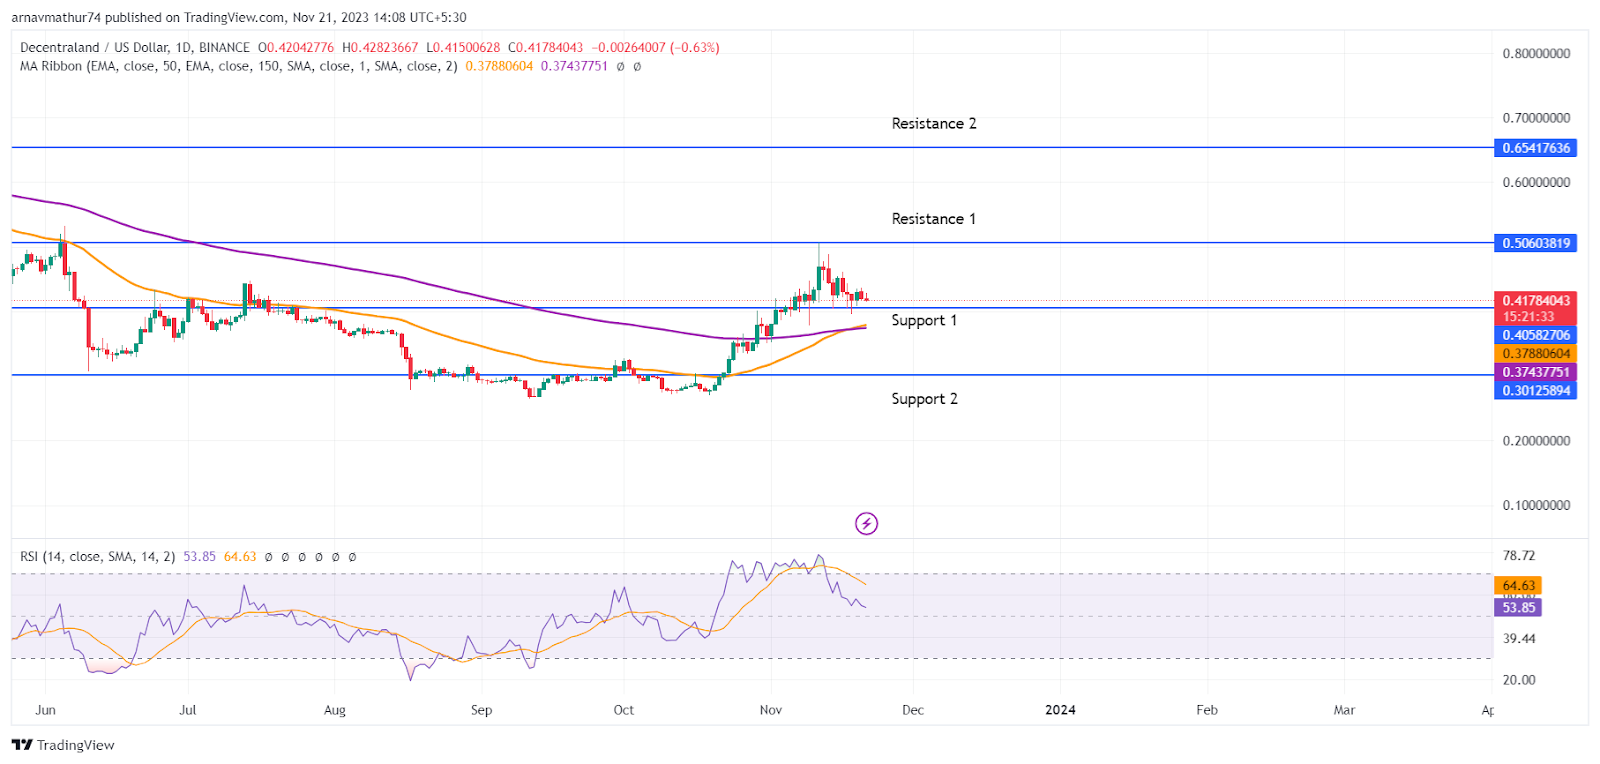 LINK Coin Price: Bulls on Uptrend, What is Next for LINK?